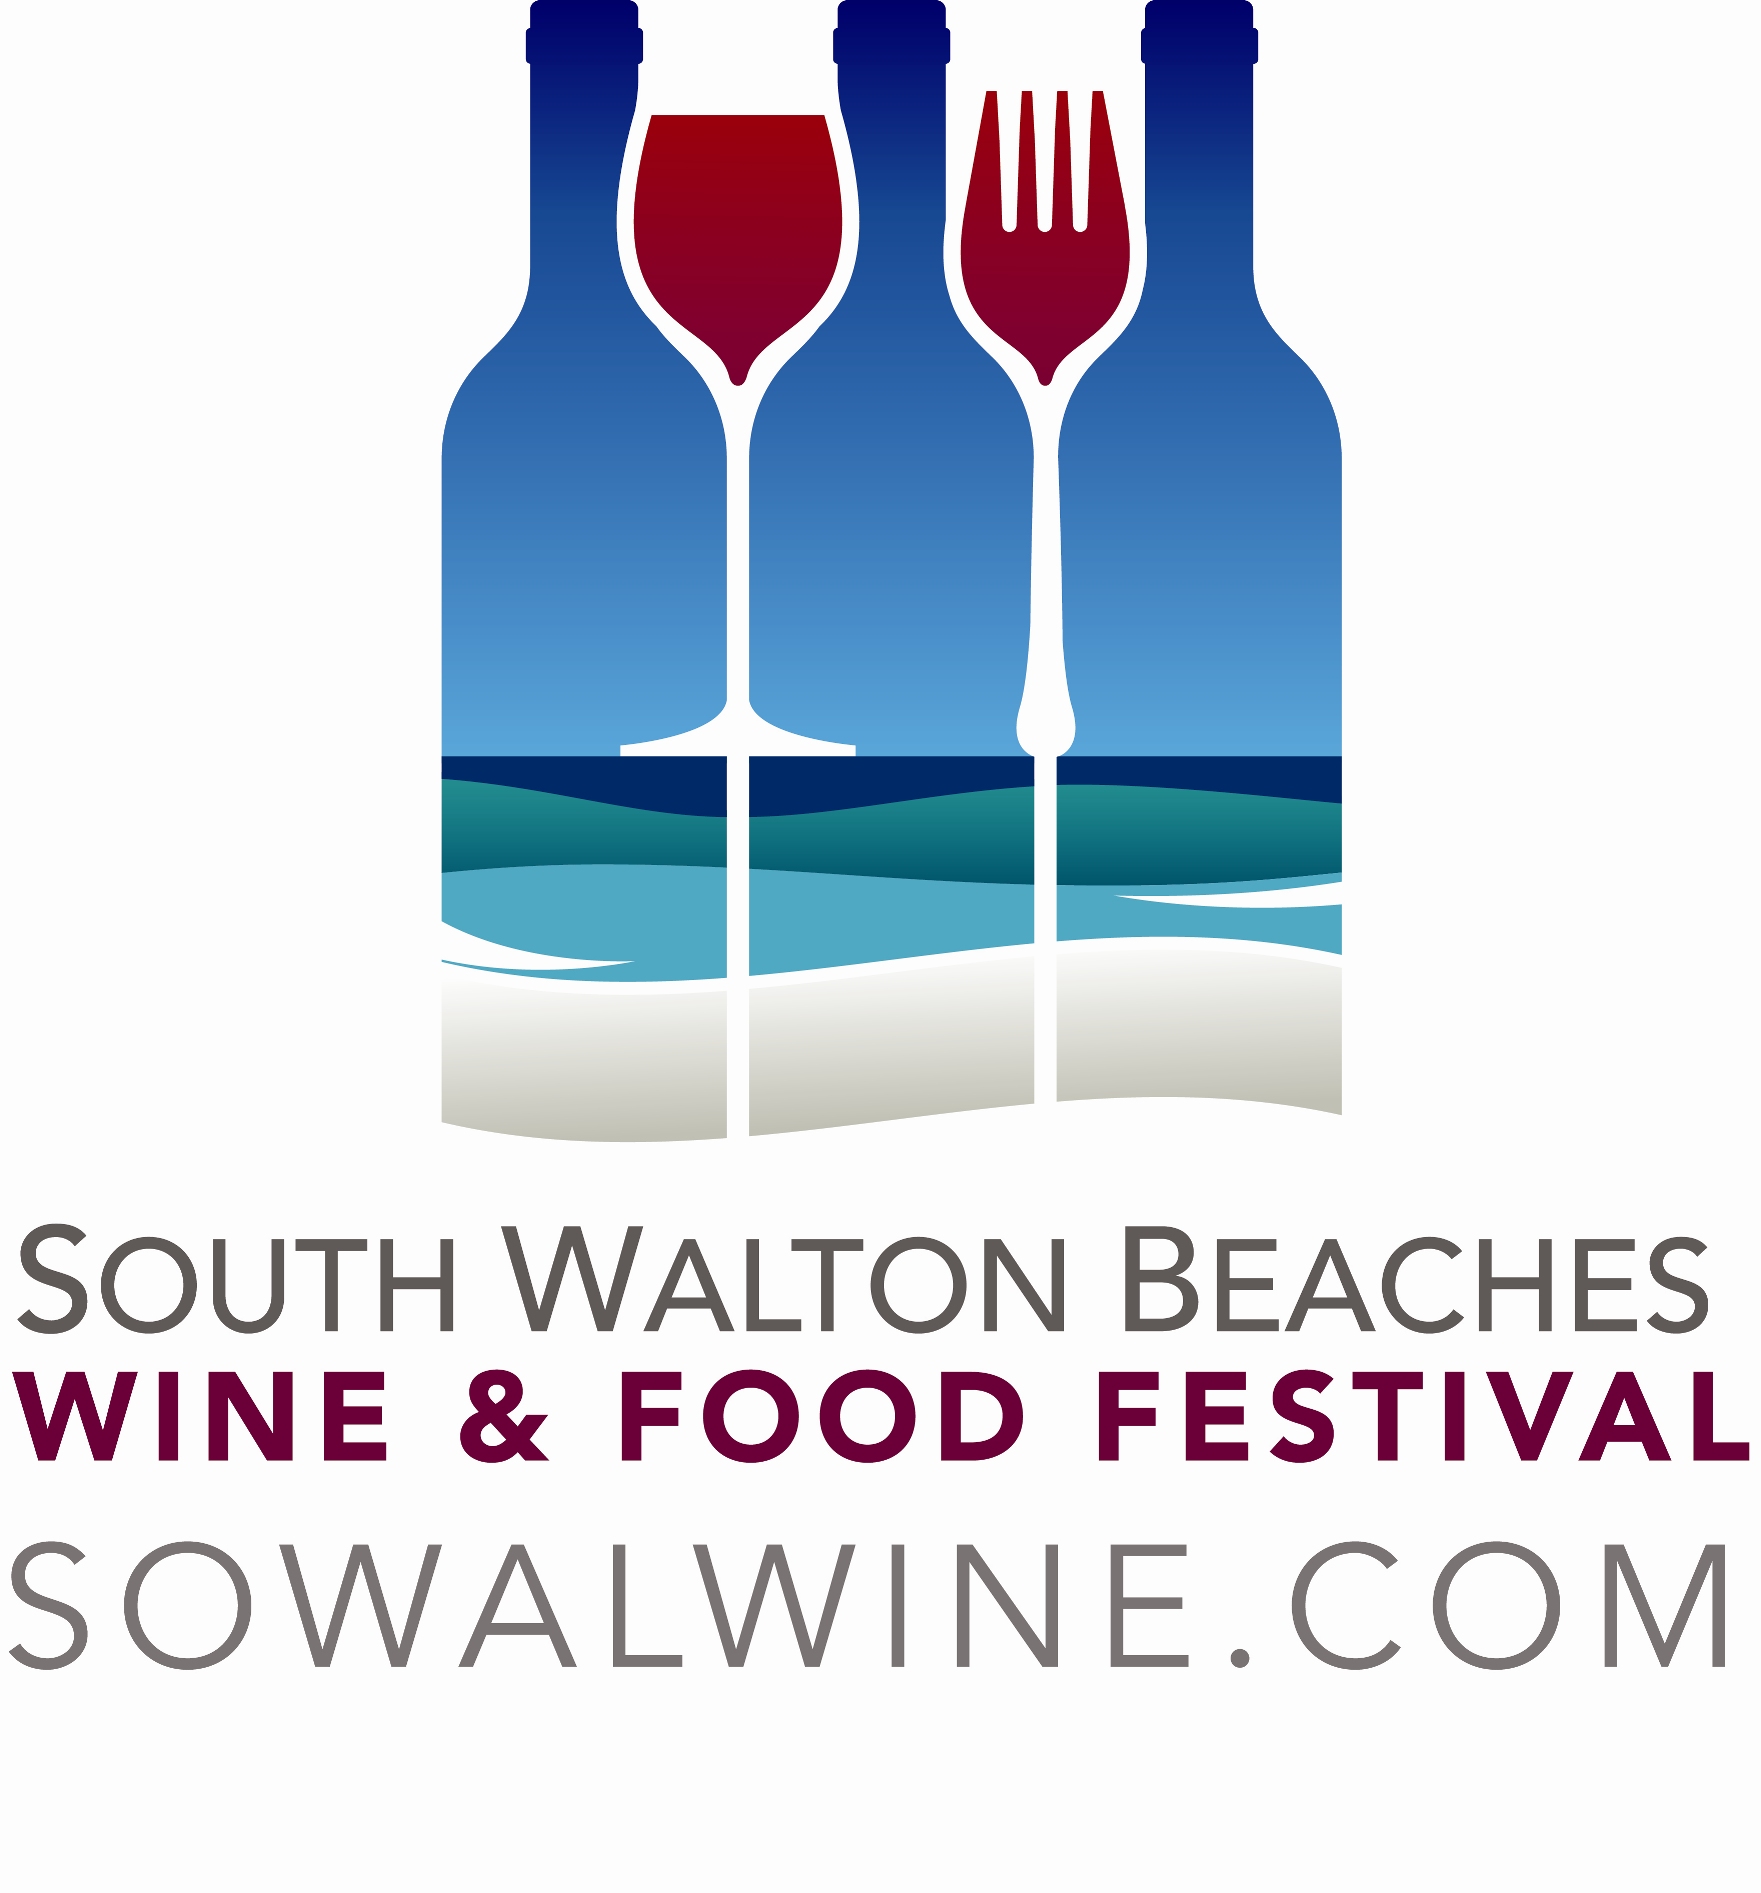 Discount tickets are on sale now, for a limited time, for the 2018 South Walton Beaches Wine and Food Festival.